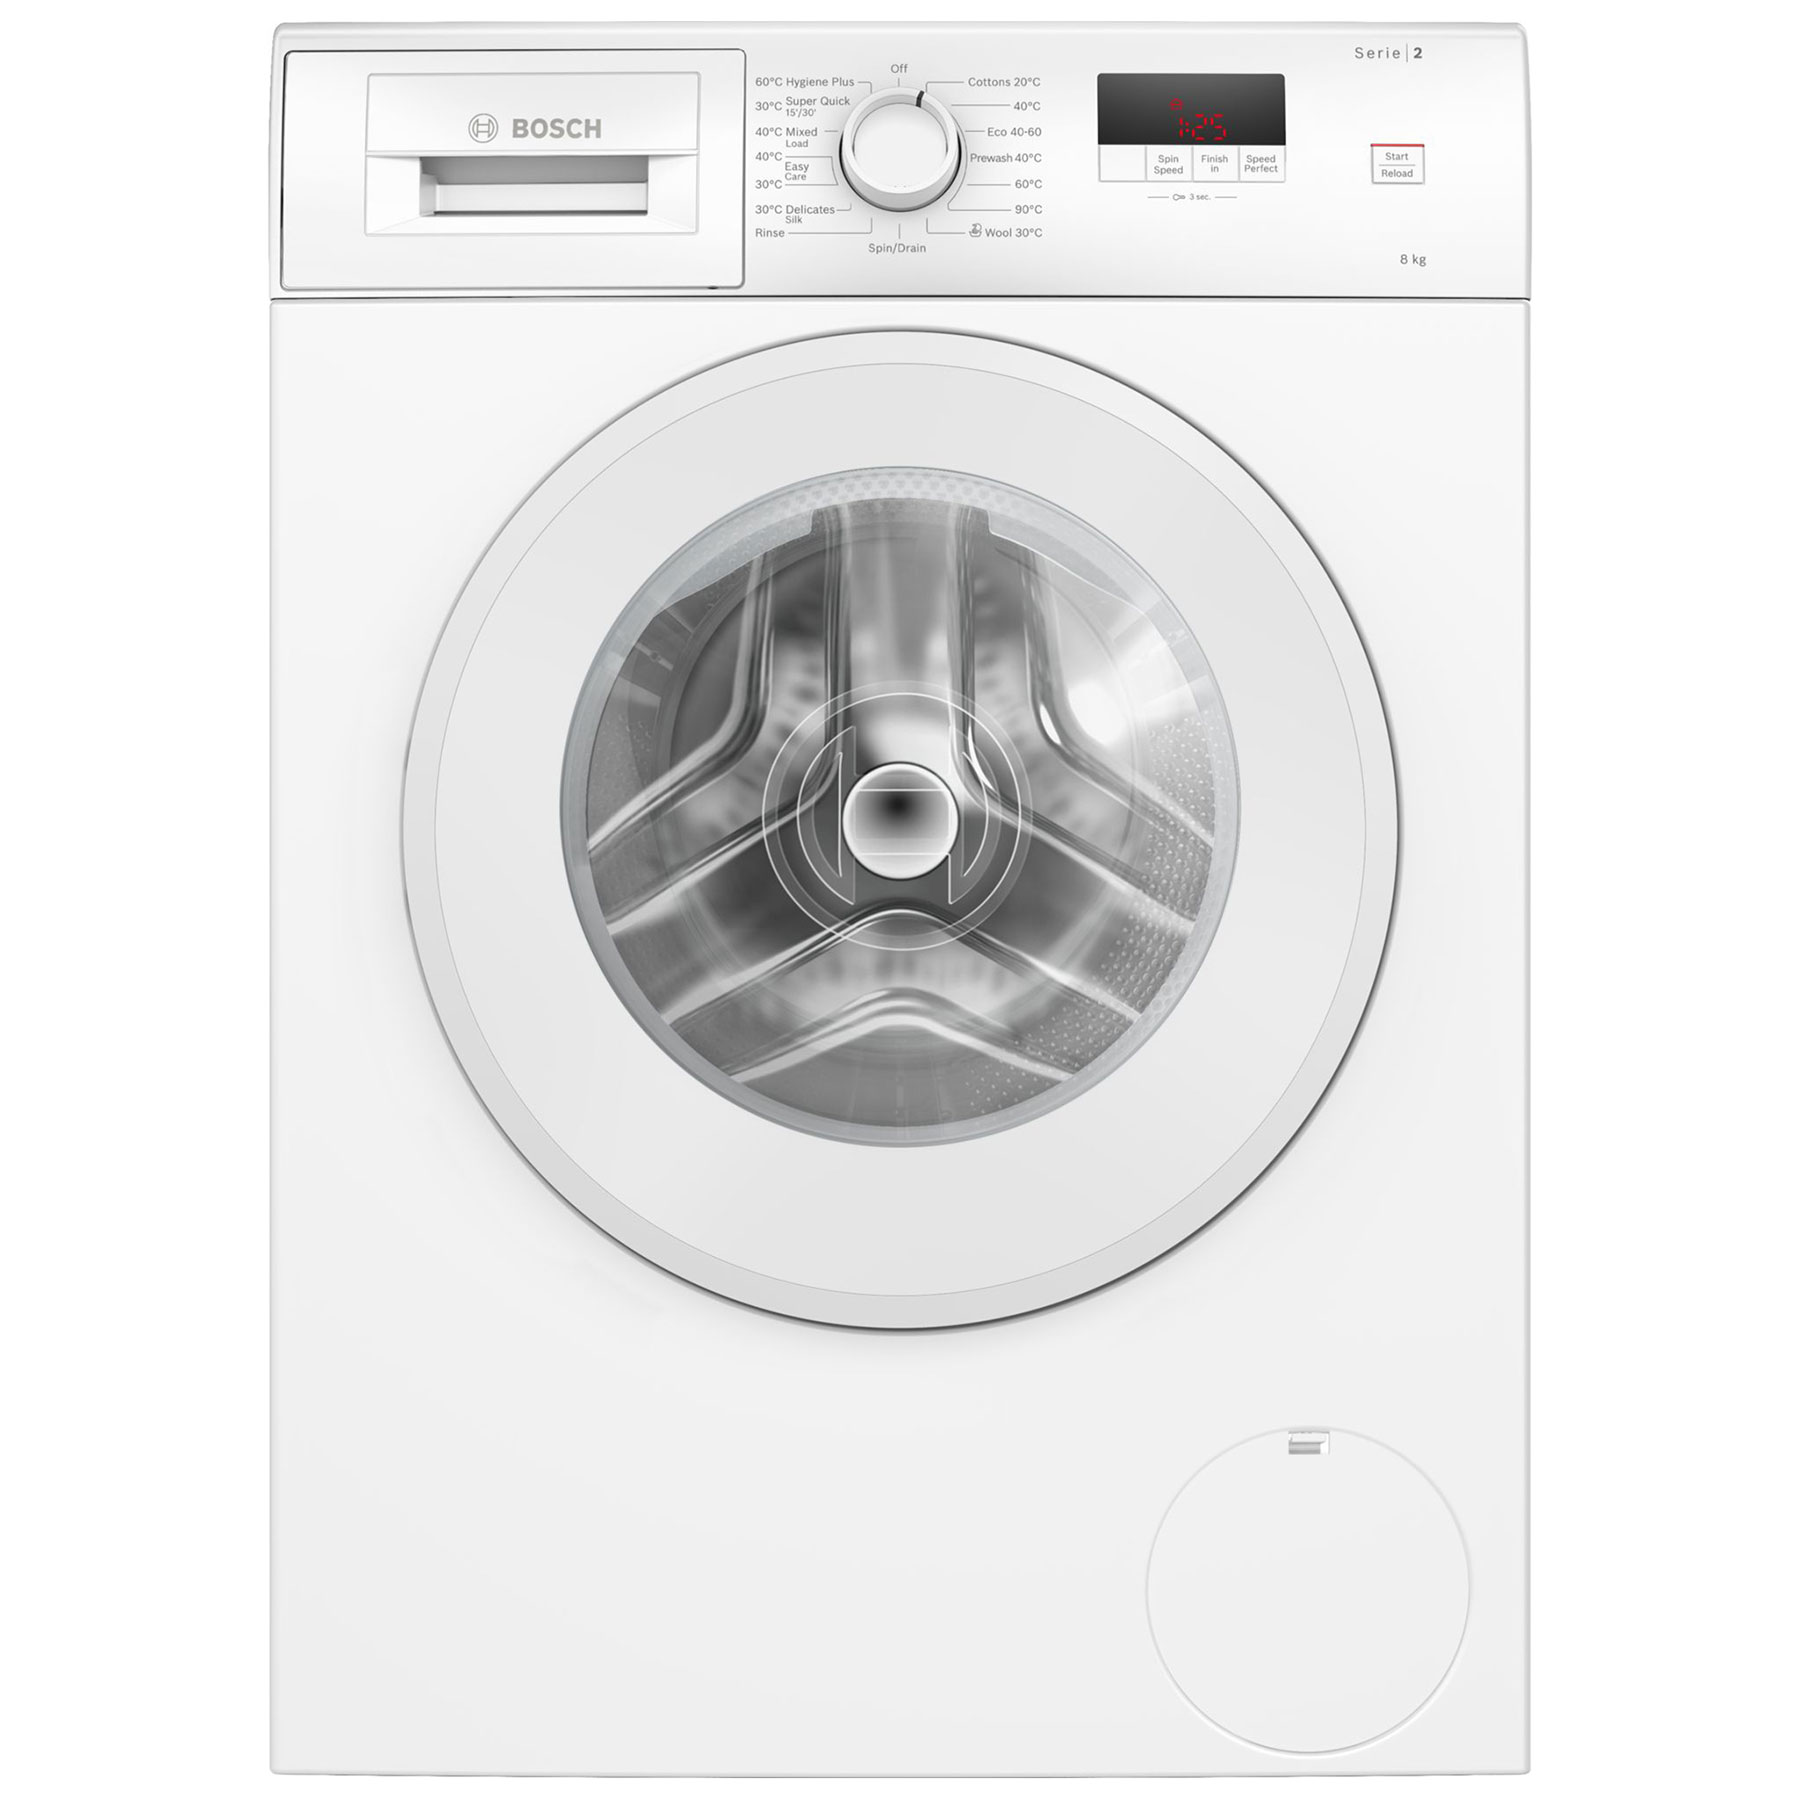 Photos - Washing Machine Bosch WGE03408GB Series 2  in White 1400rpm 8Kg A Rated 